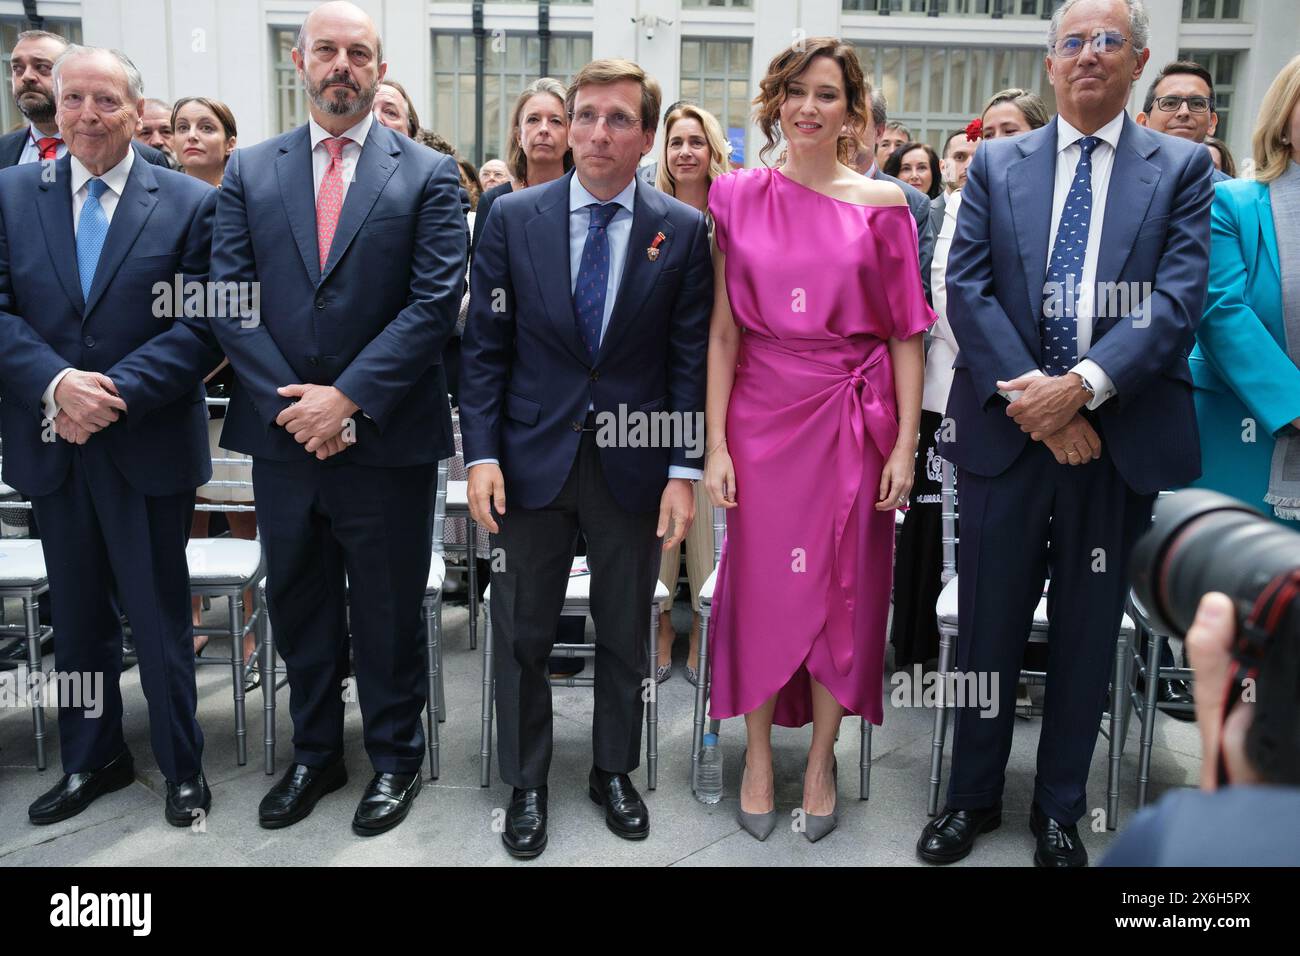 sabel Diaz Ayuso and José Luis Martínez-Almeida attend the Honorary Distinctions awards of the Madrid City Council San Isidro at the Crystal Palace in Stock Photo